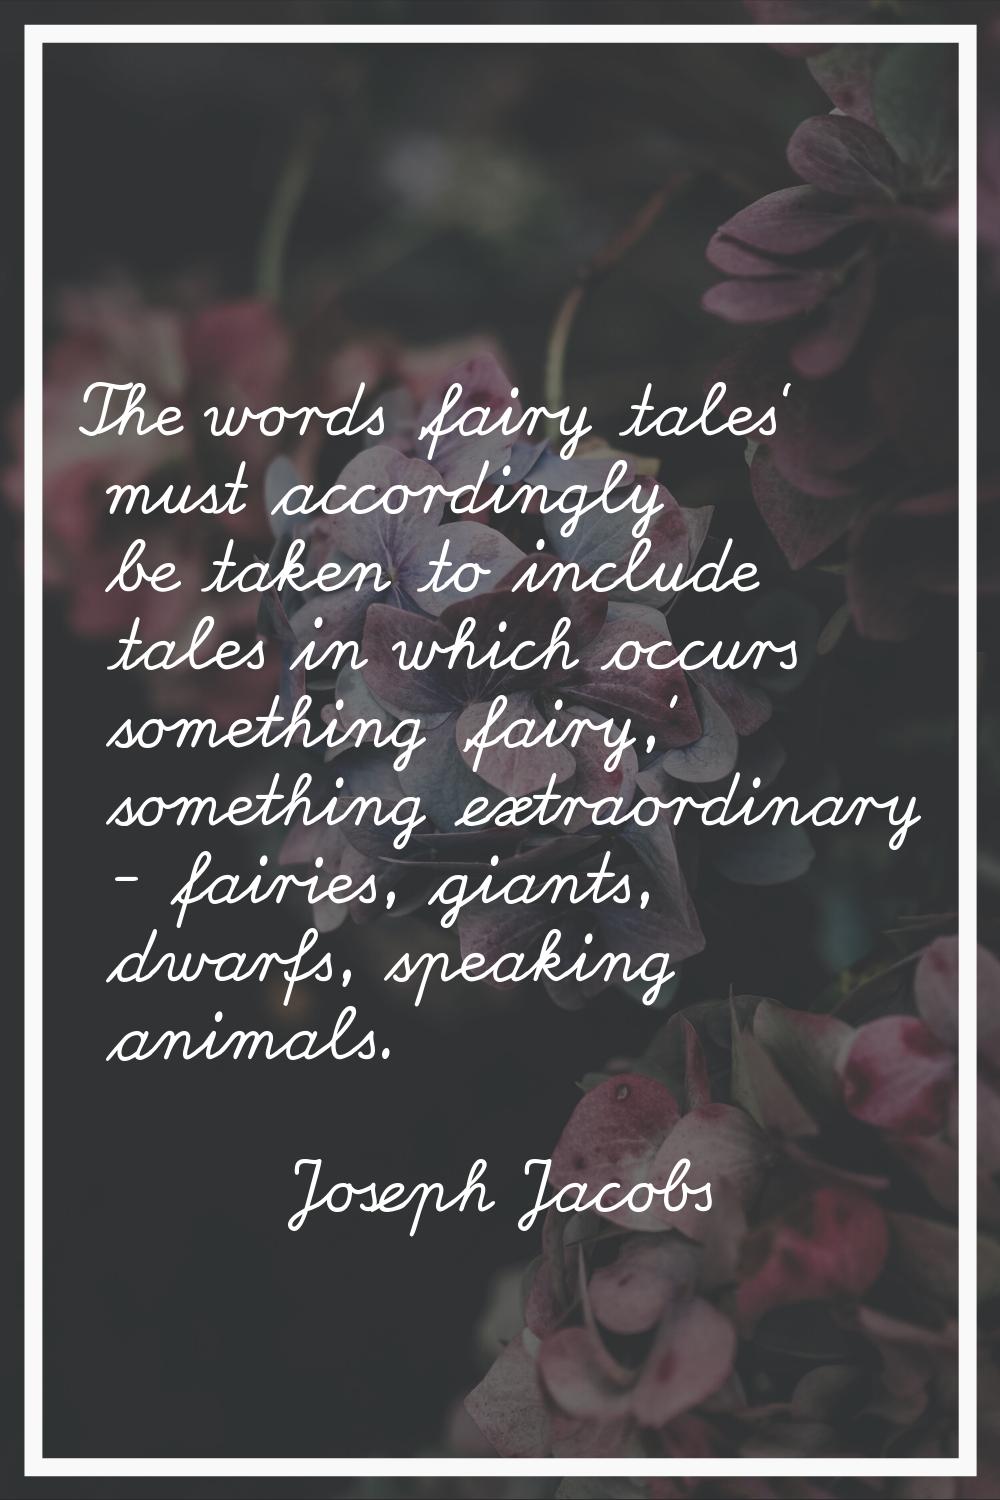 The words 'fairy tales' must accordingly be taken to include tales in which occurs something 'fairy